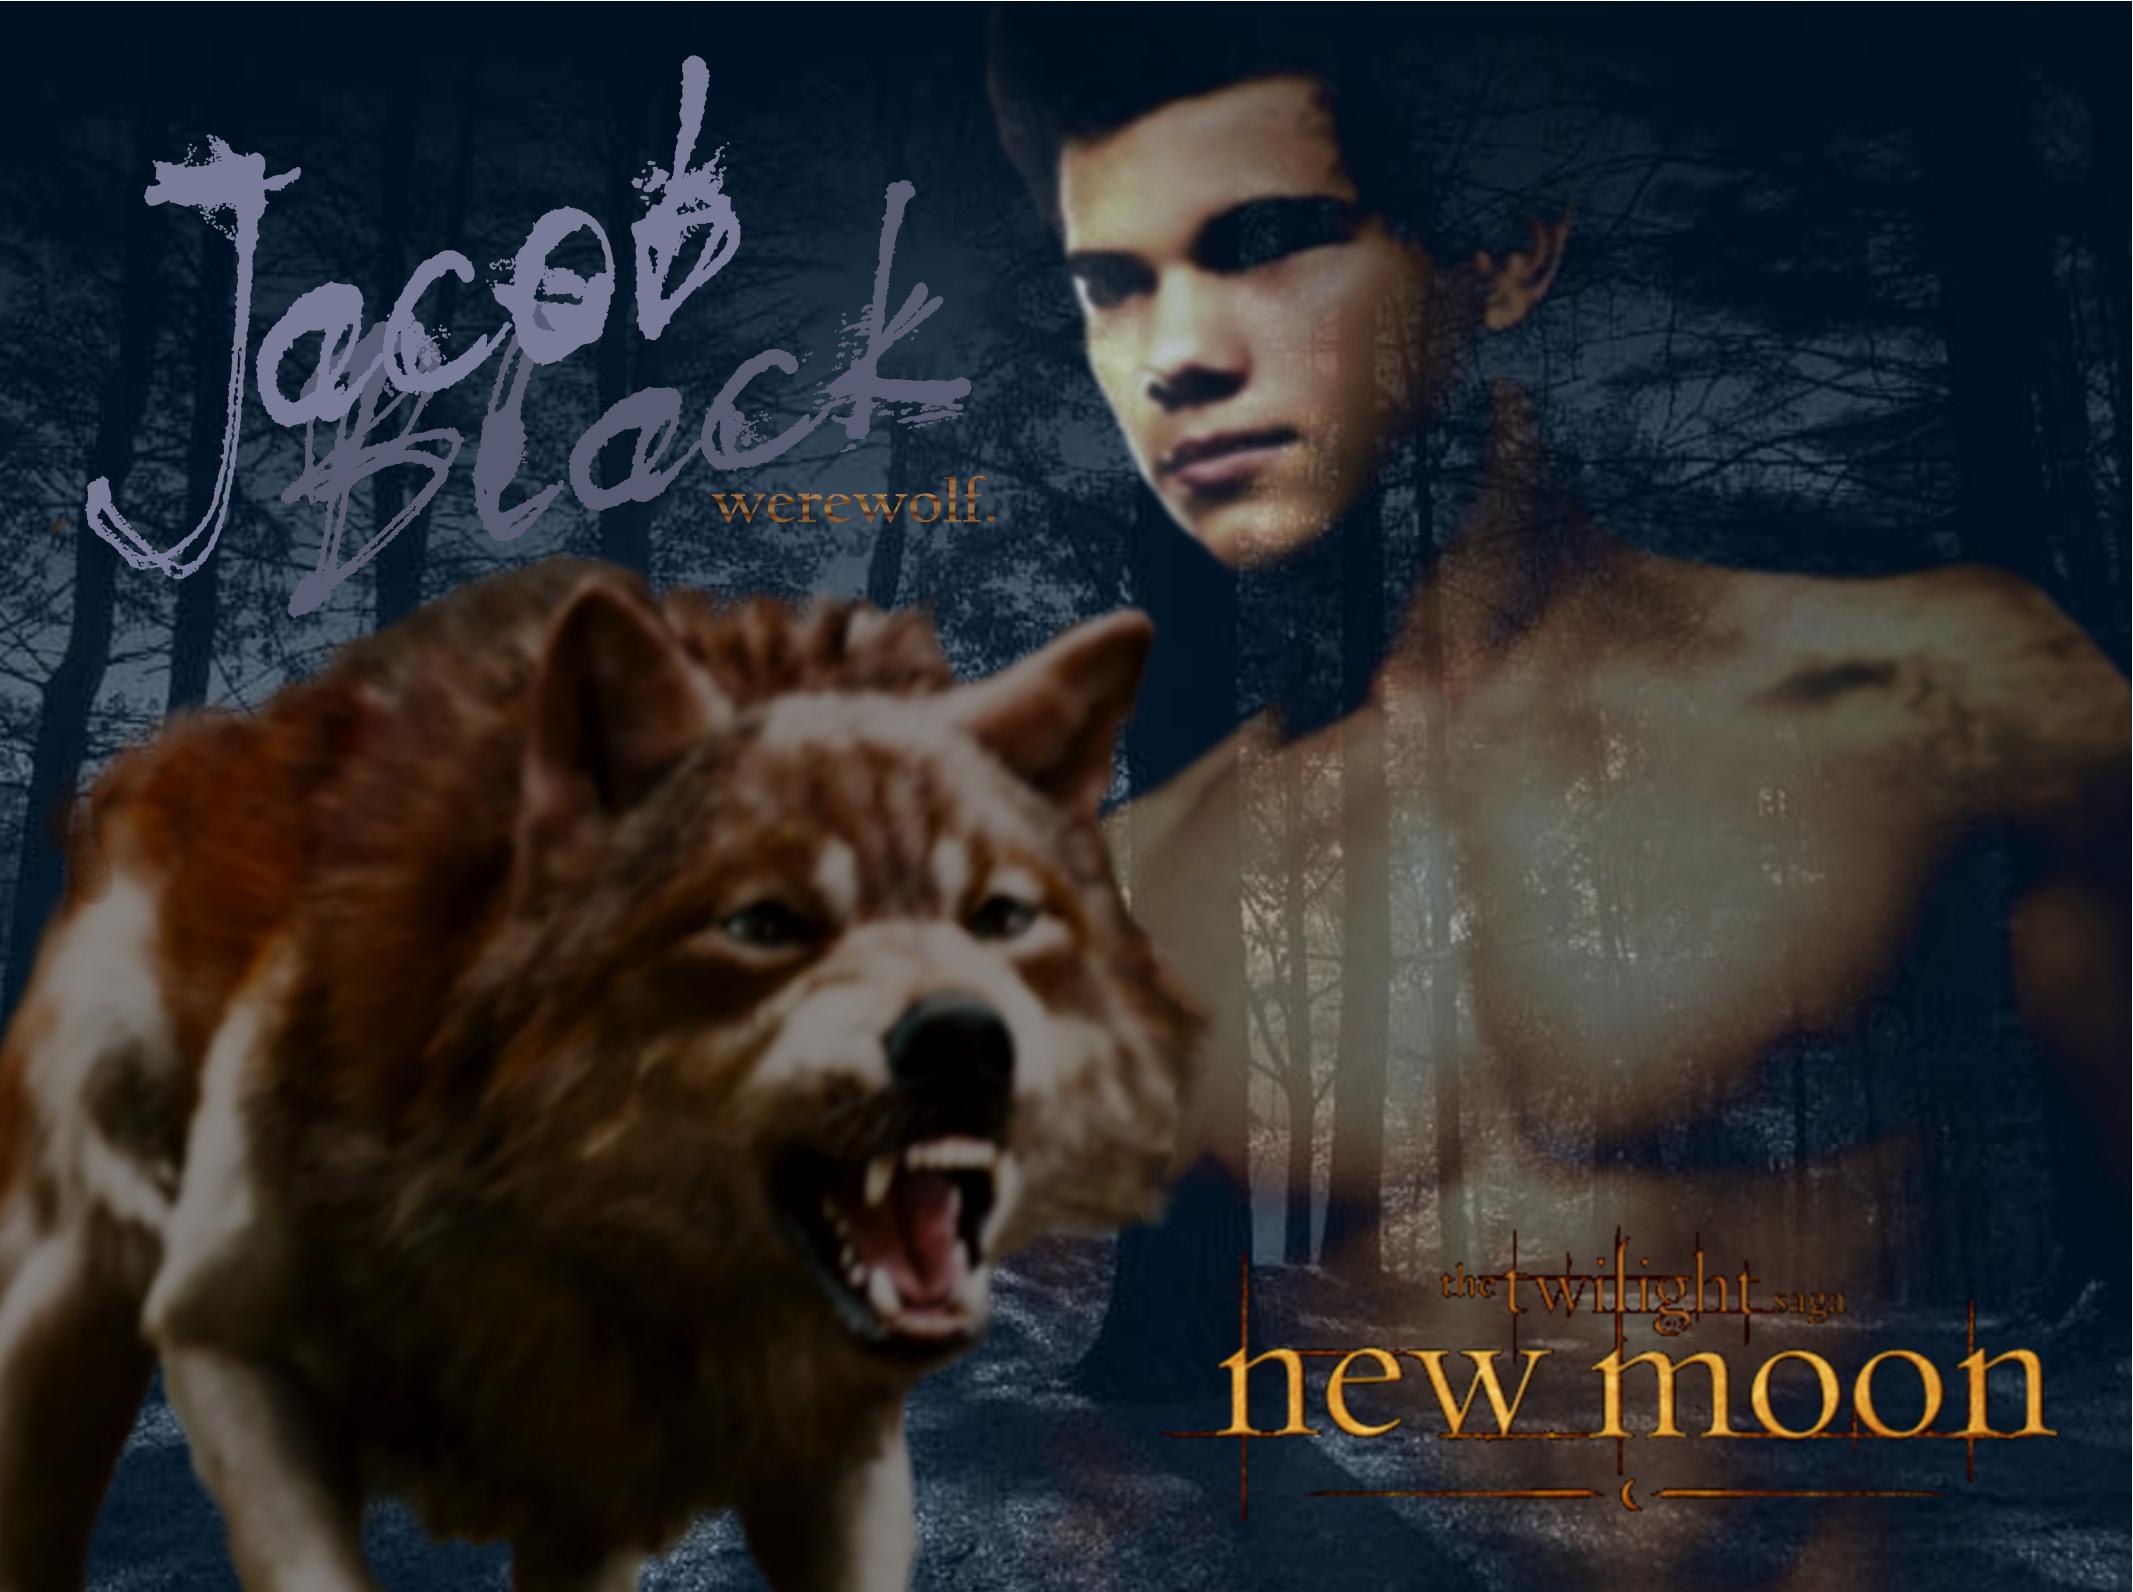 Jacob Black As Portrayed By Taylor Lautner In New Moon